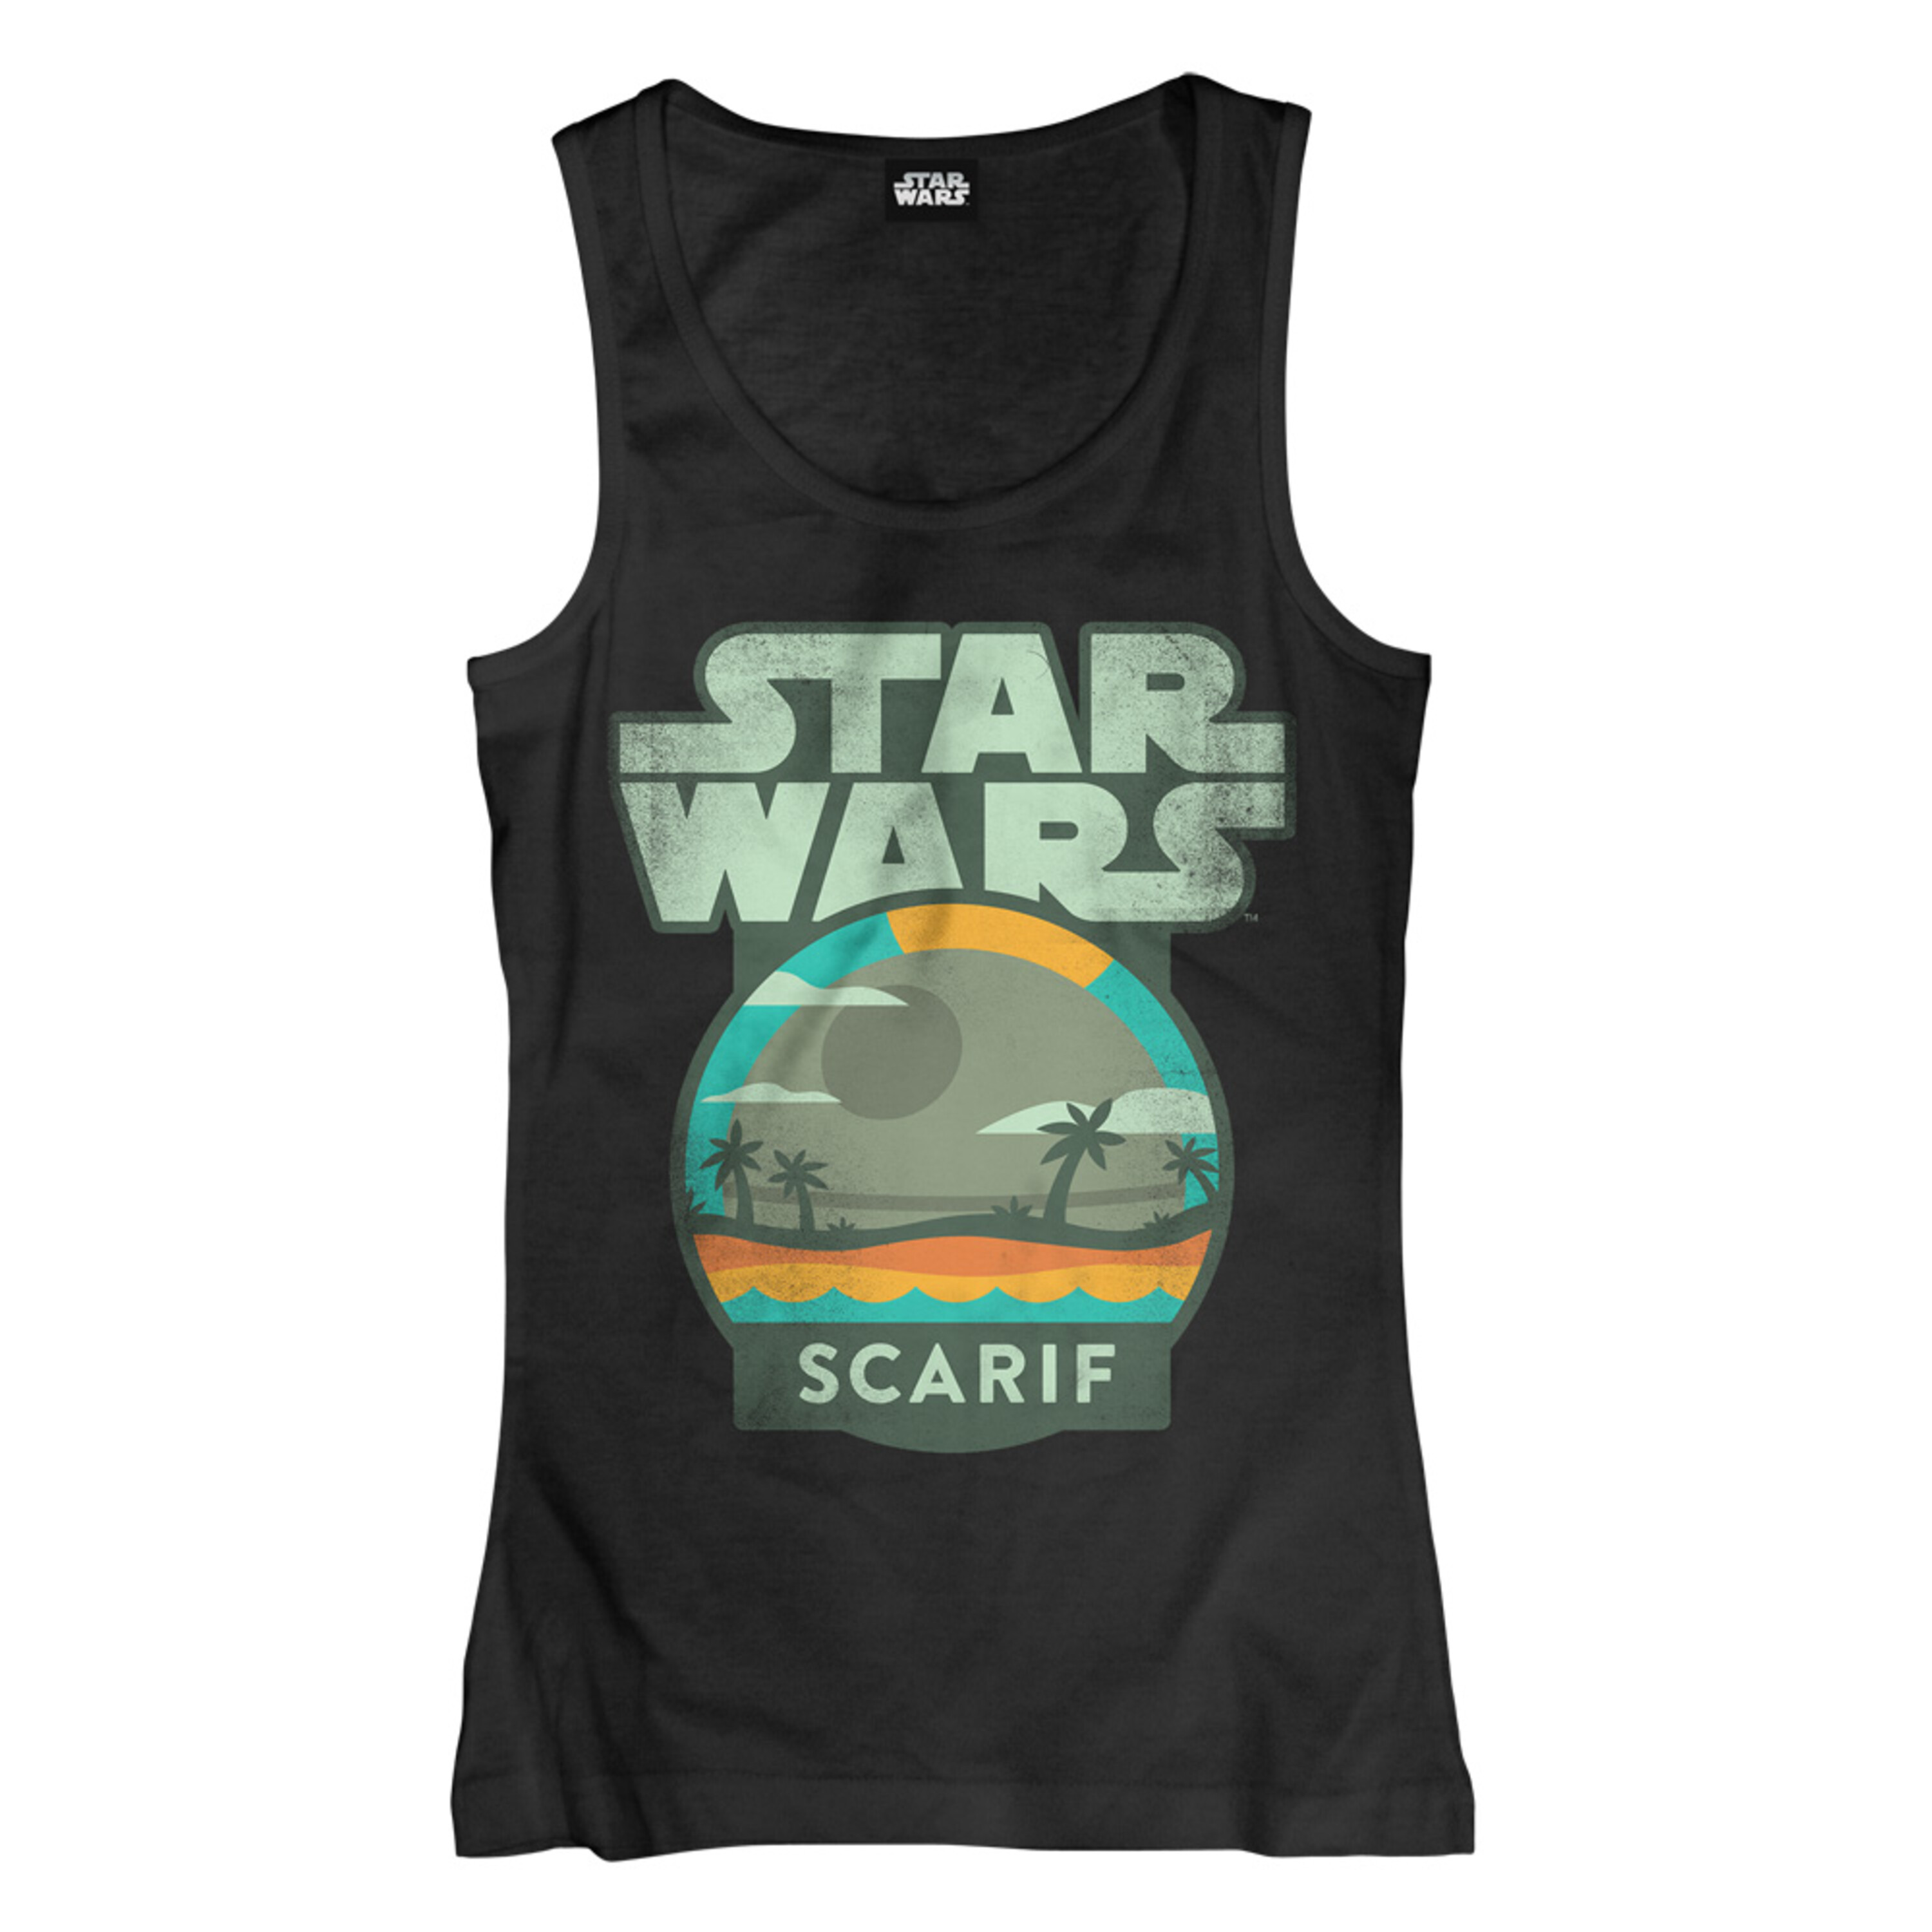 uDiscover Germany - Official Store - Scarif - Star Wars - Tank-Top